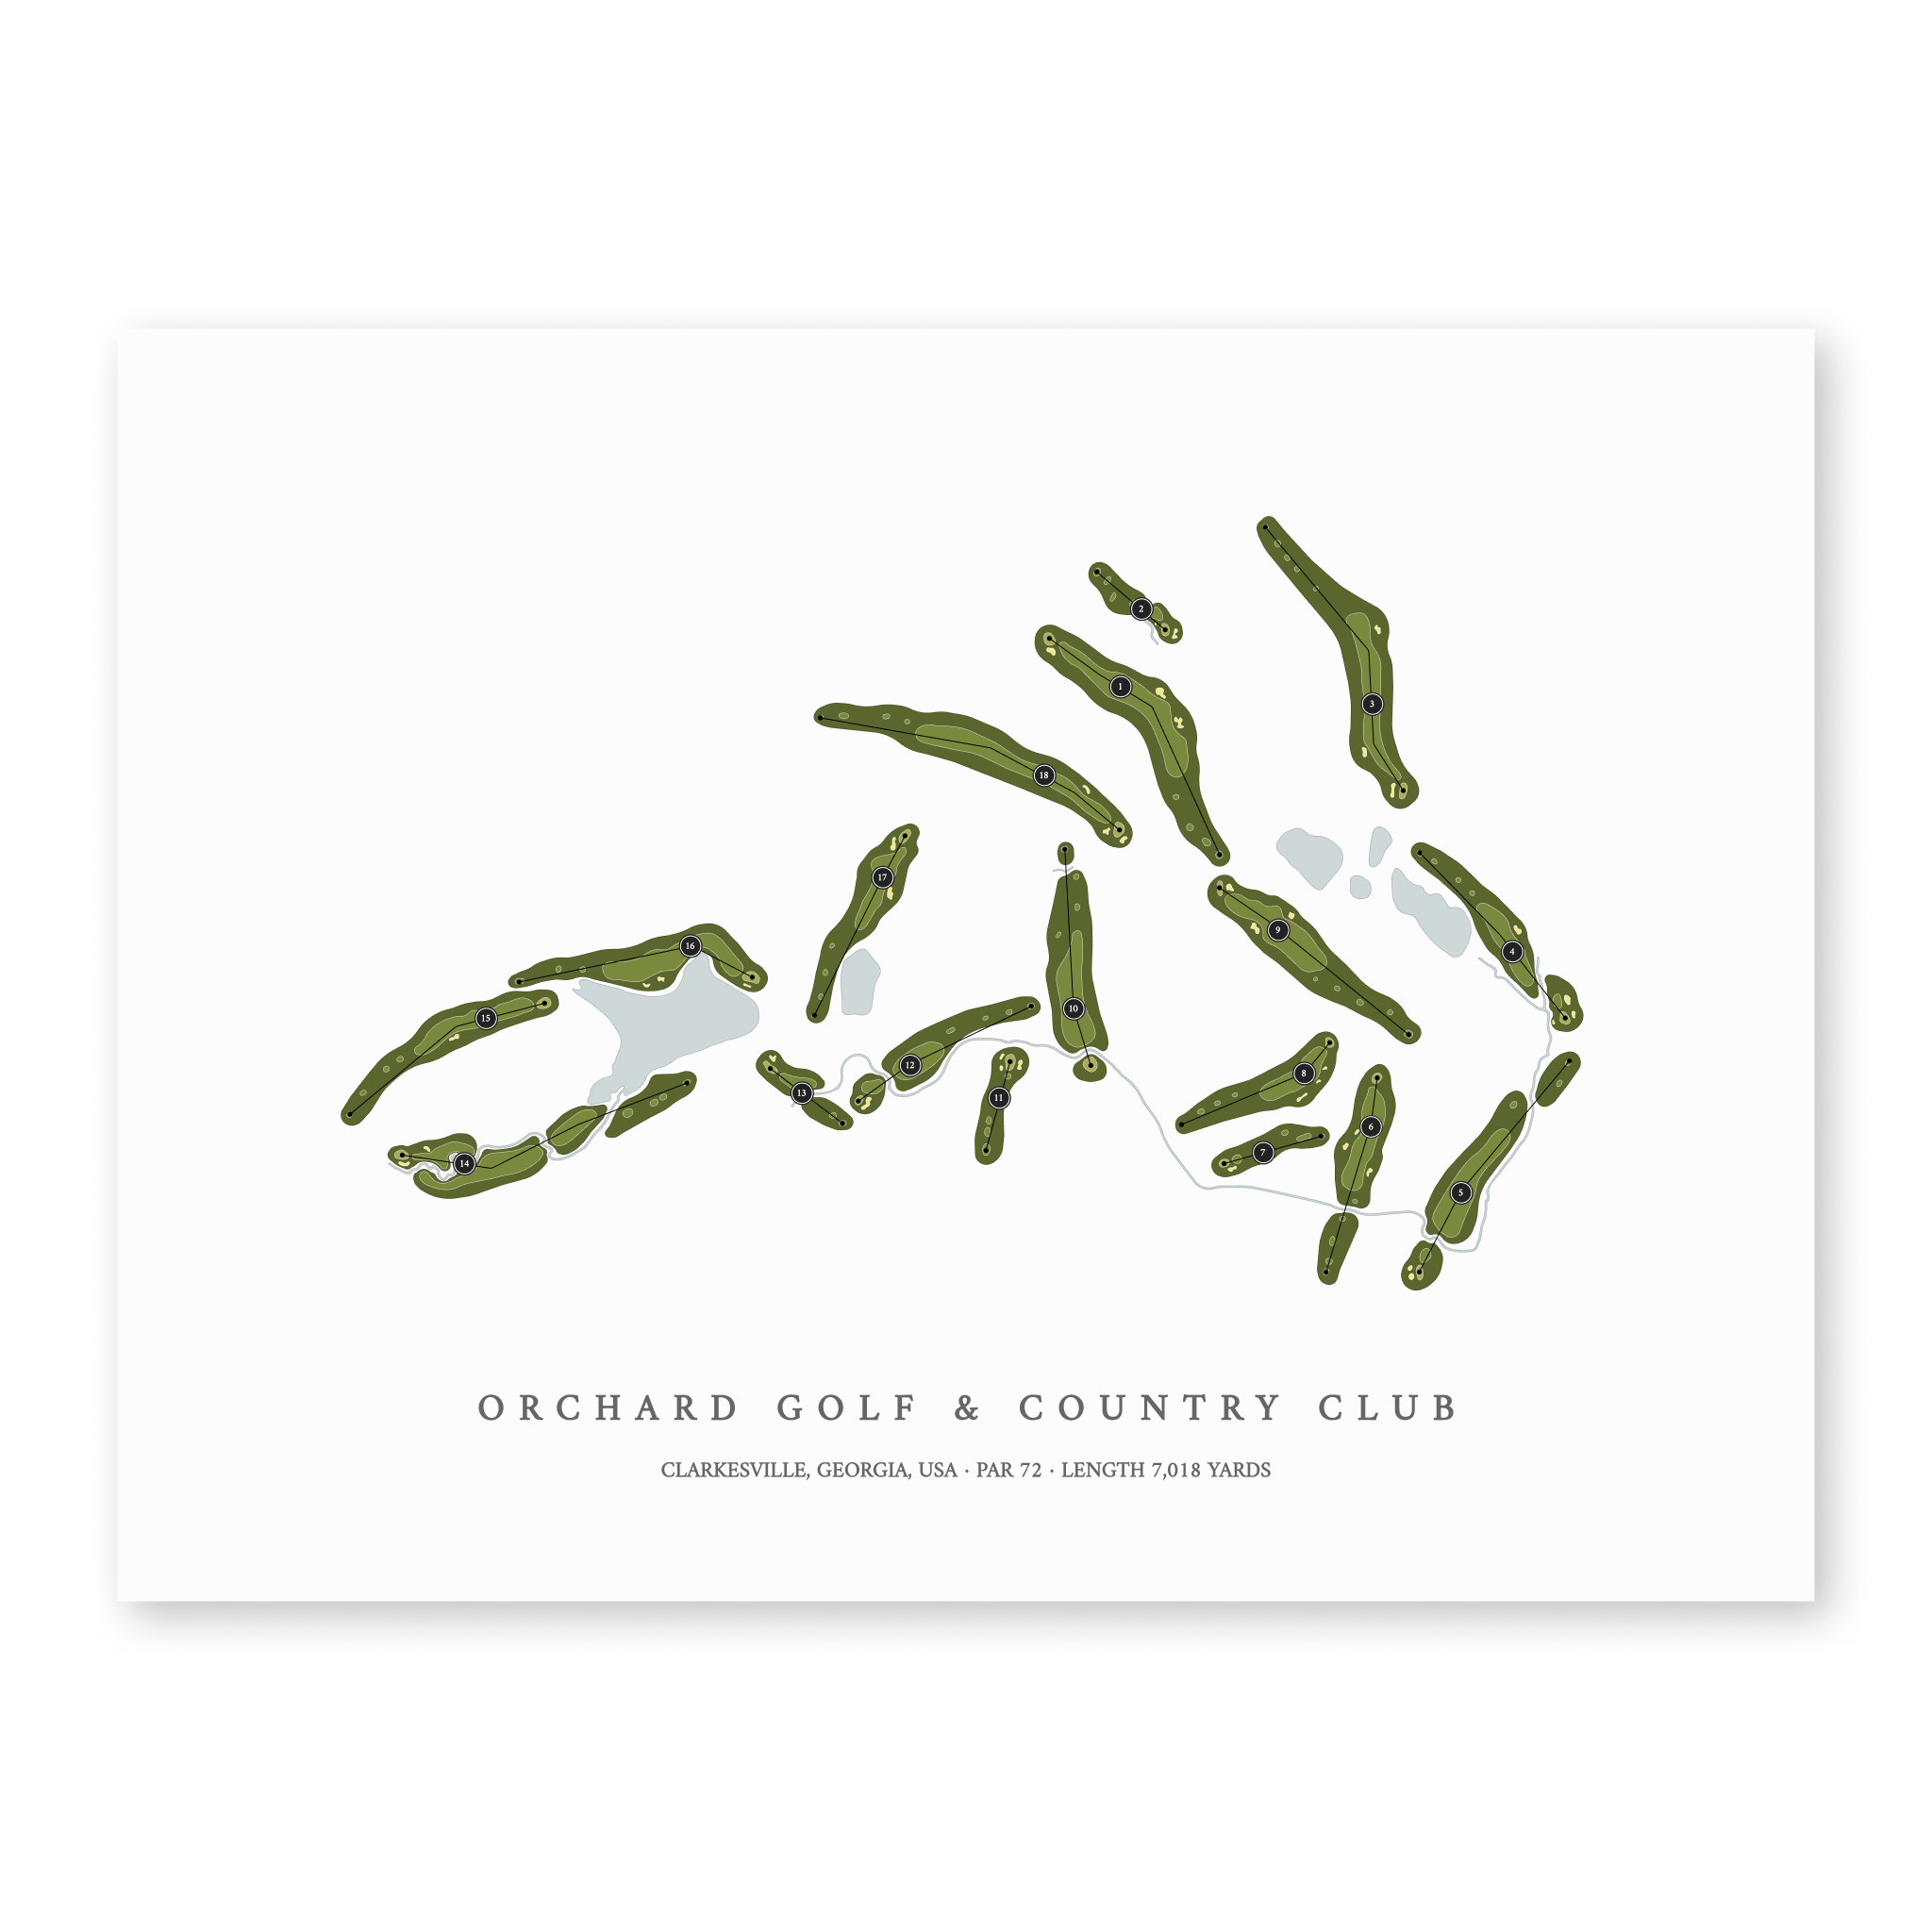 Orchard Golf & Country Club | Golf Course Map | Unframed